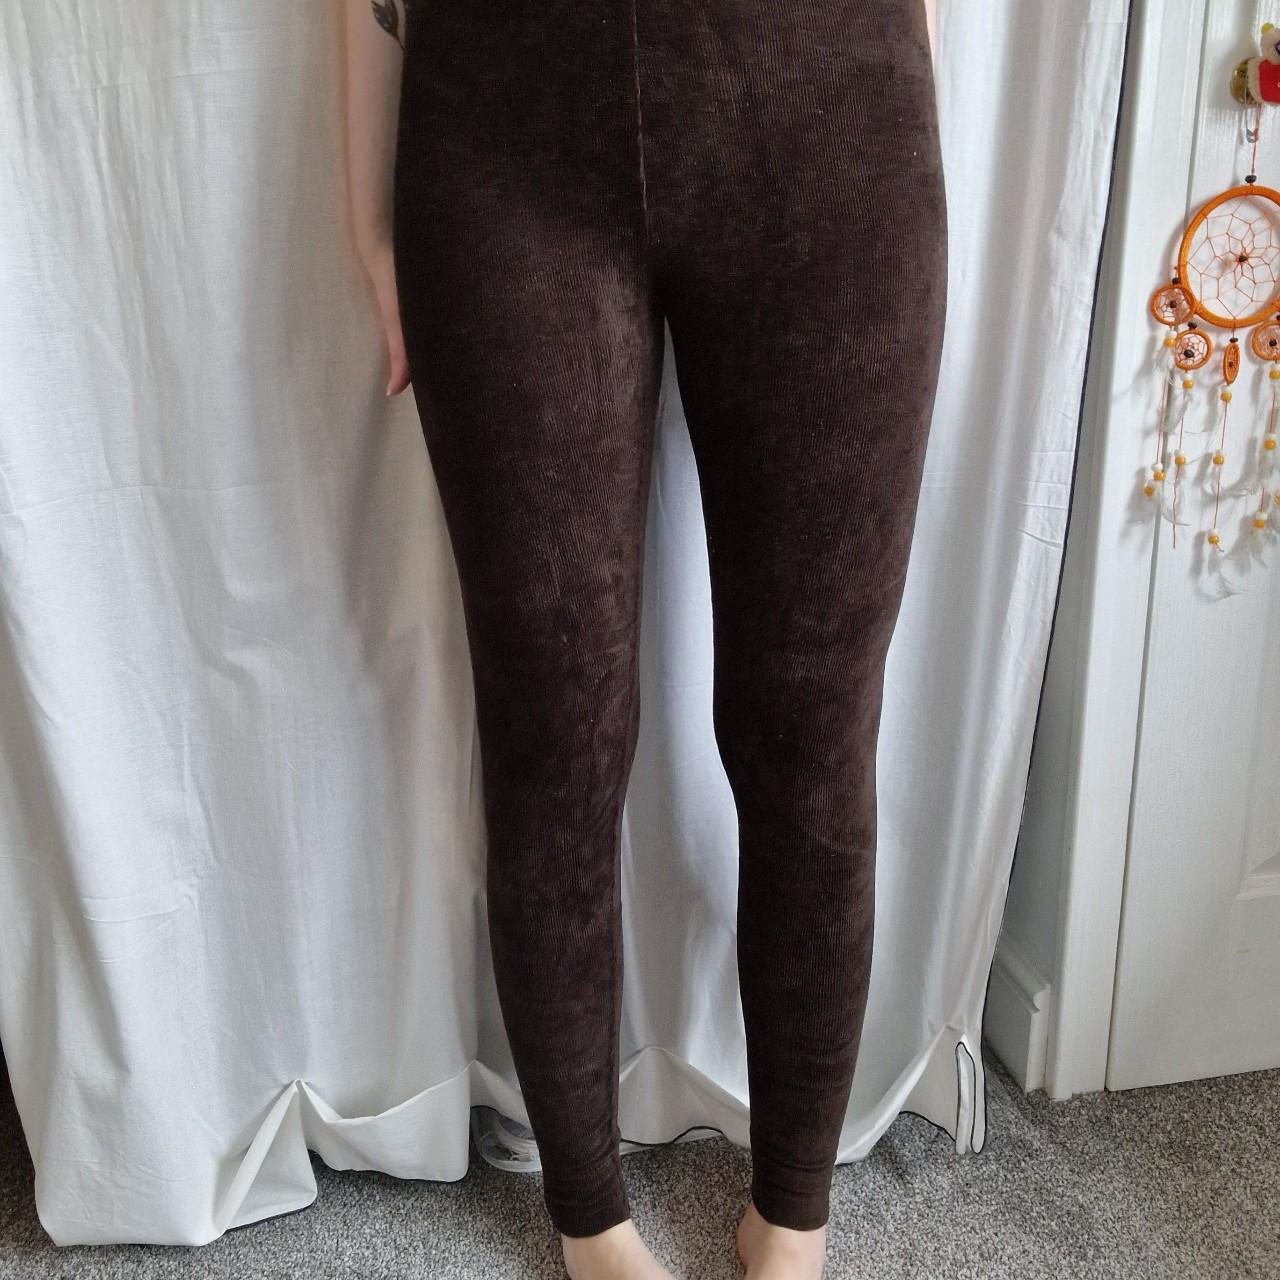 These corduroy style leggings from Marks and Spencer